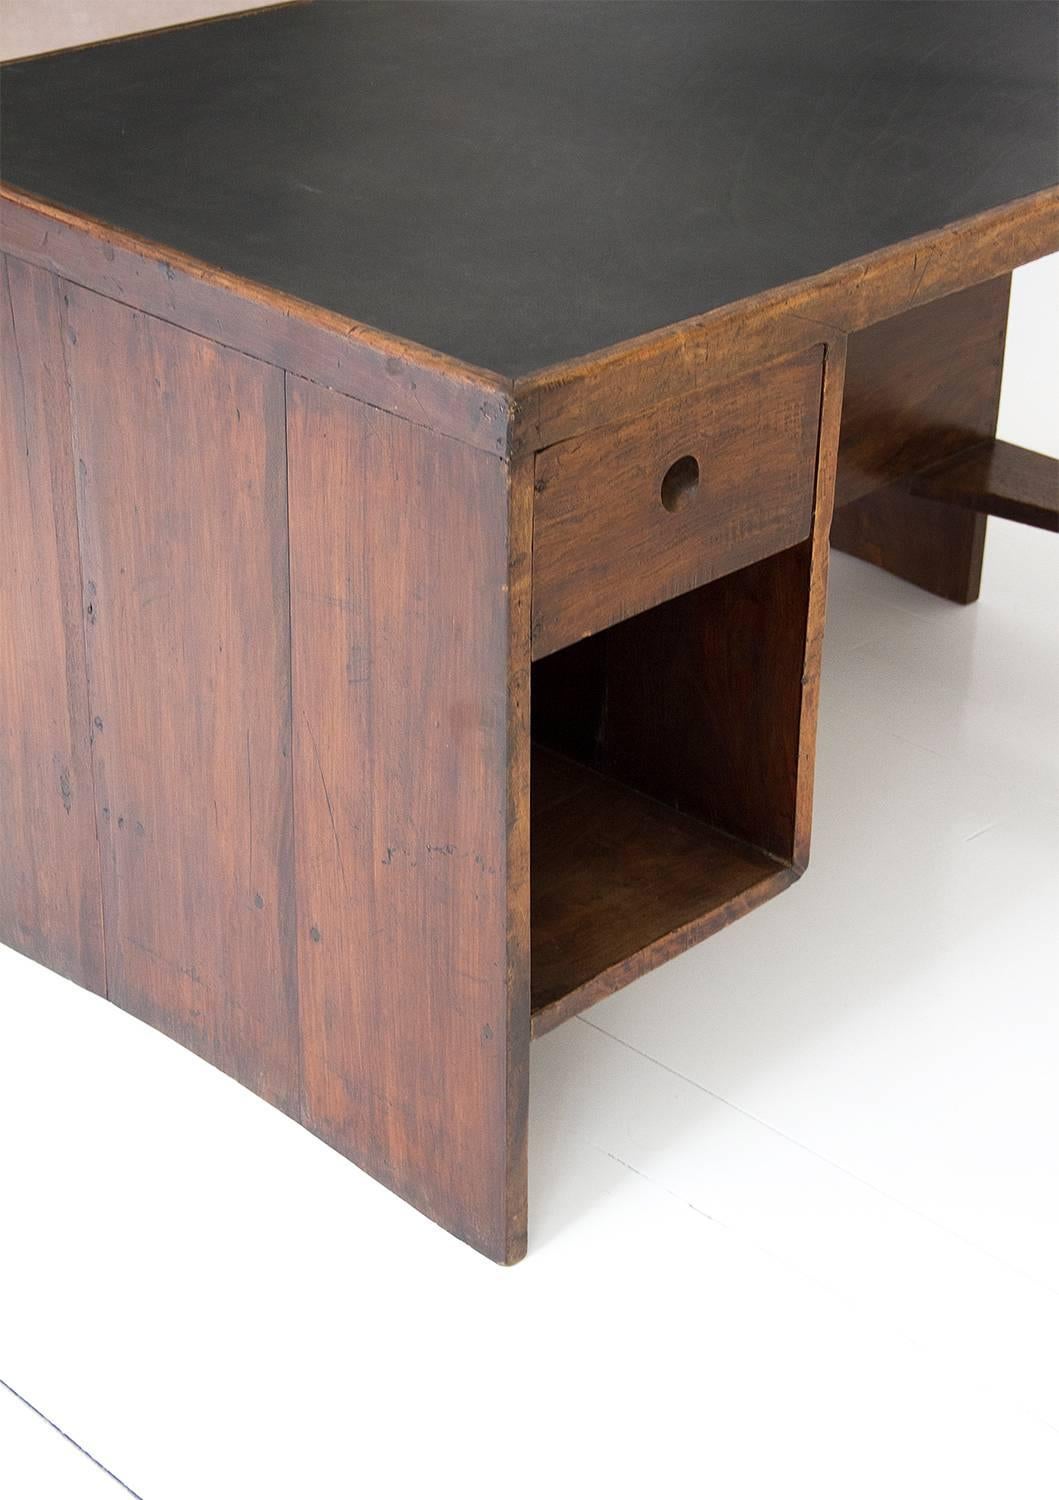 Mid-Century Modern Pierre Jeanneret Office Desk for Chandigarh, Wood and Leather, circa 1950, India For Sale